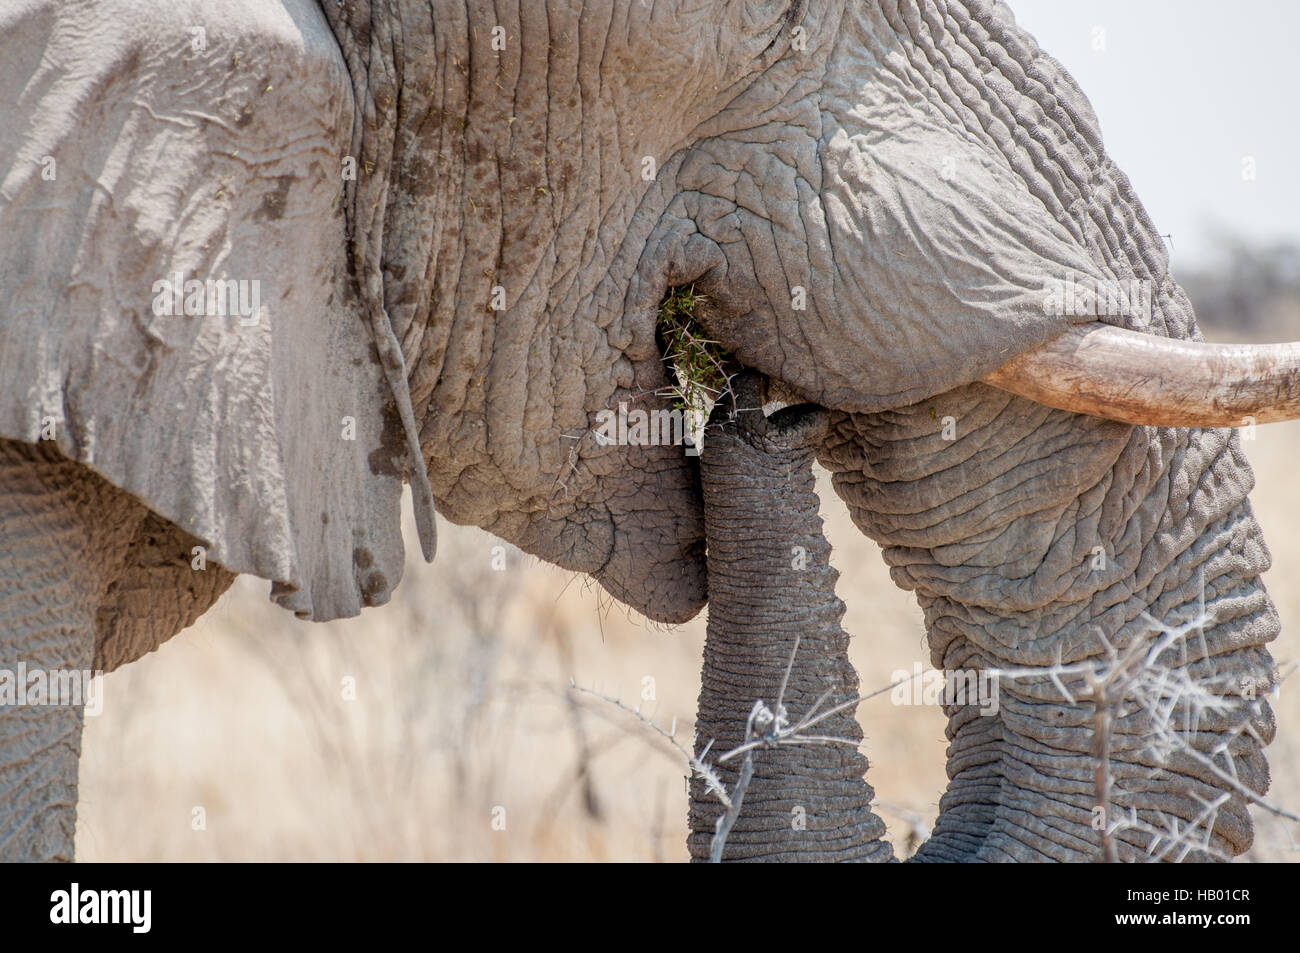 Close up of an Elephant Eating. Stock Photo